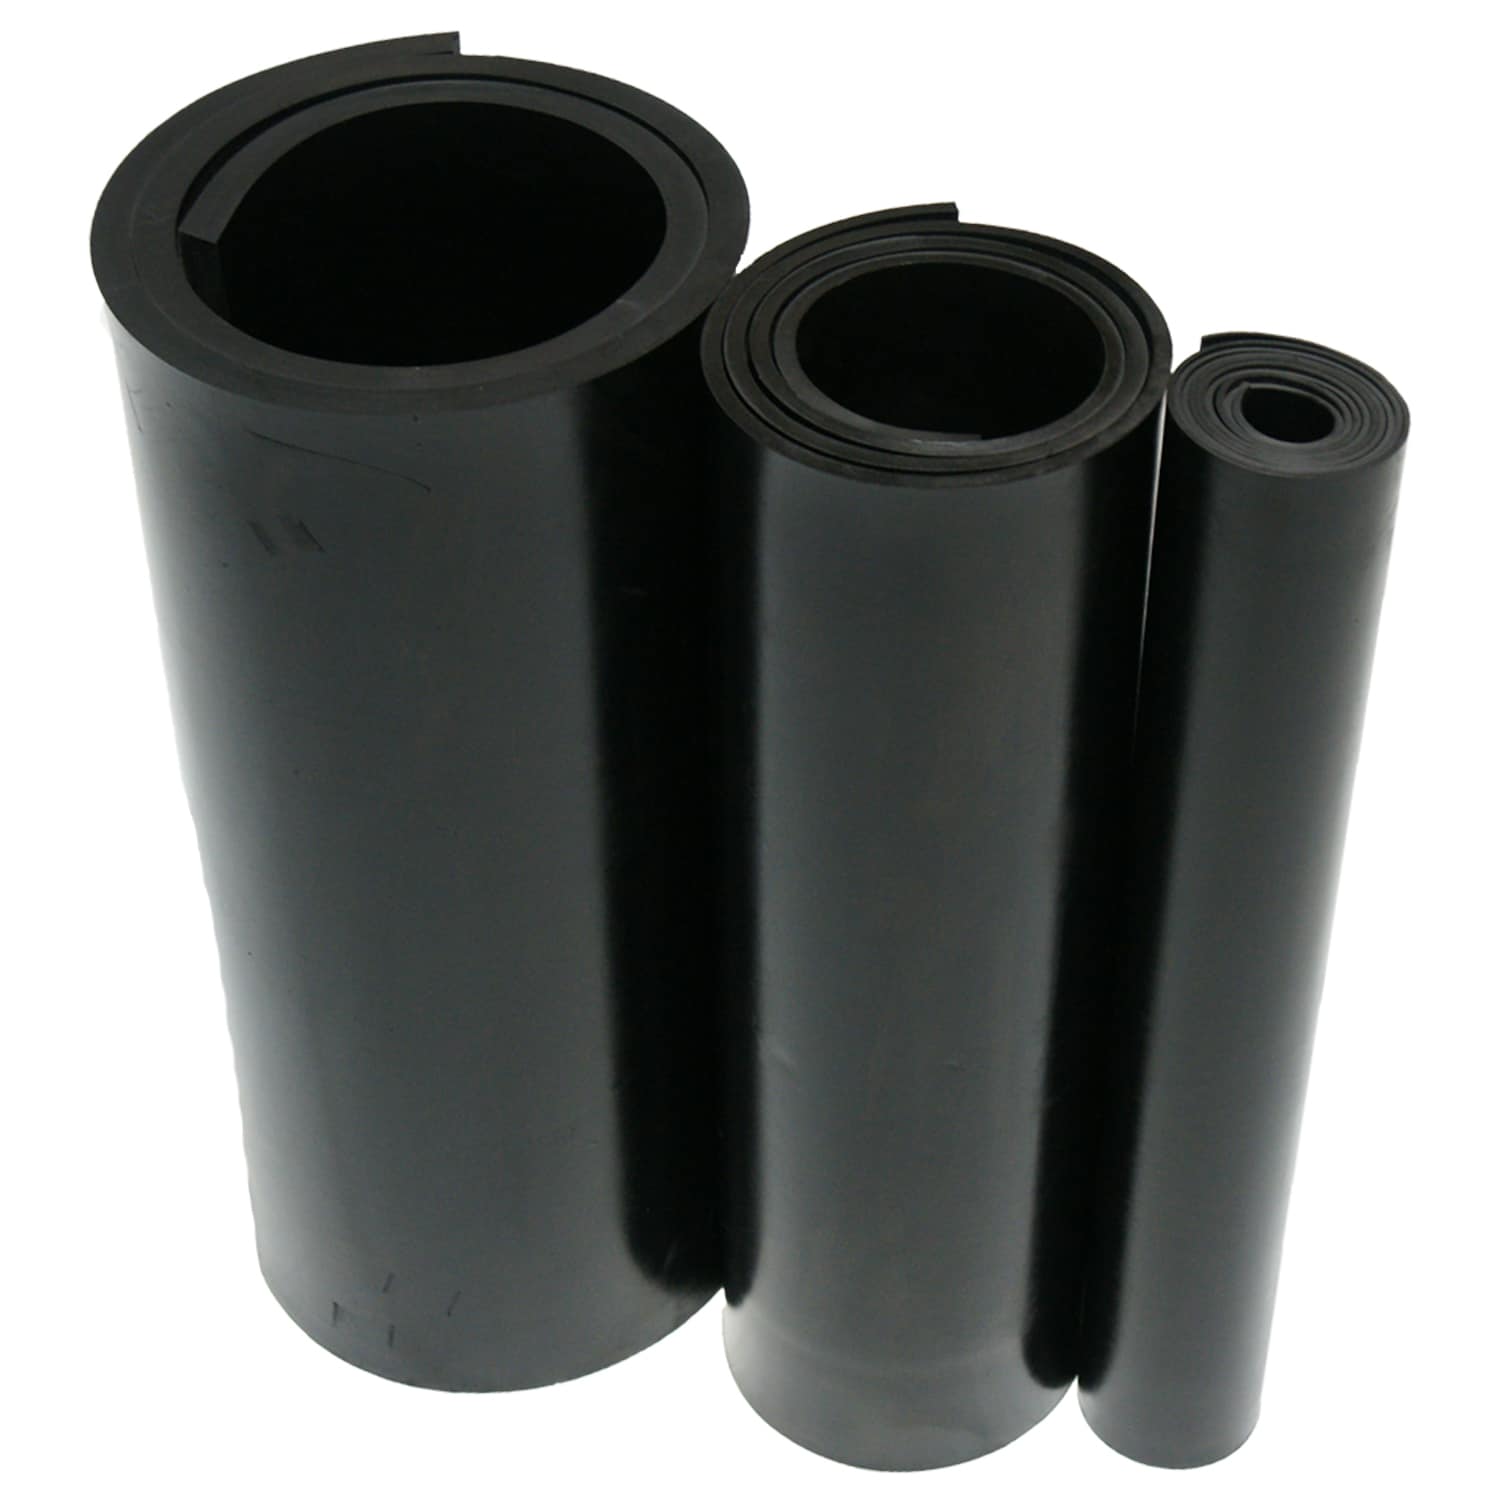 Recycled Rubber - 60A - Sheets and Rolls 1/4 in. T x 4 ft. W x 8 ft. L  Black Rubber Garage Flooring